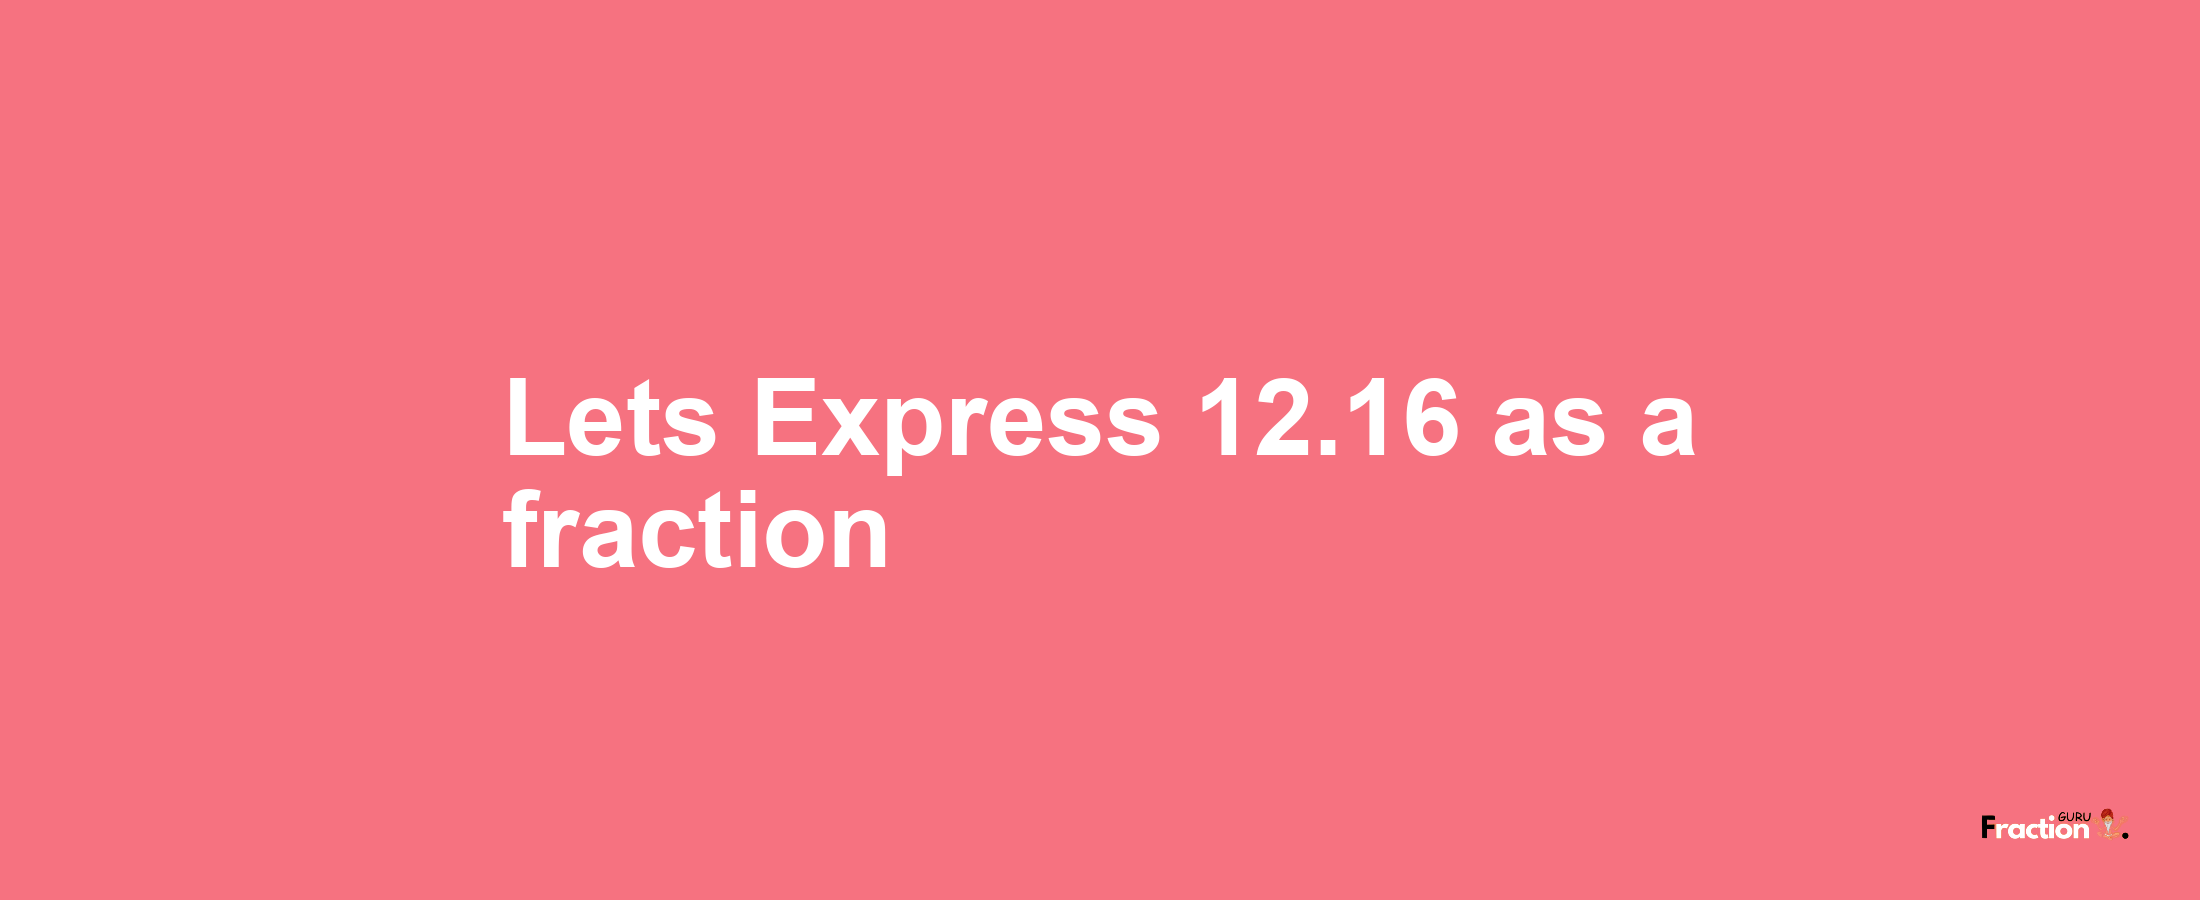 Lets Express 12.16 as afraction